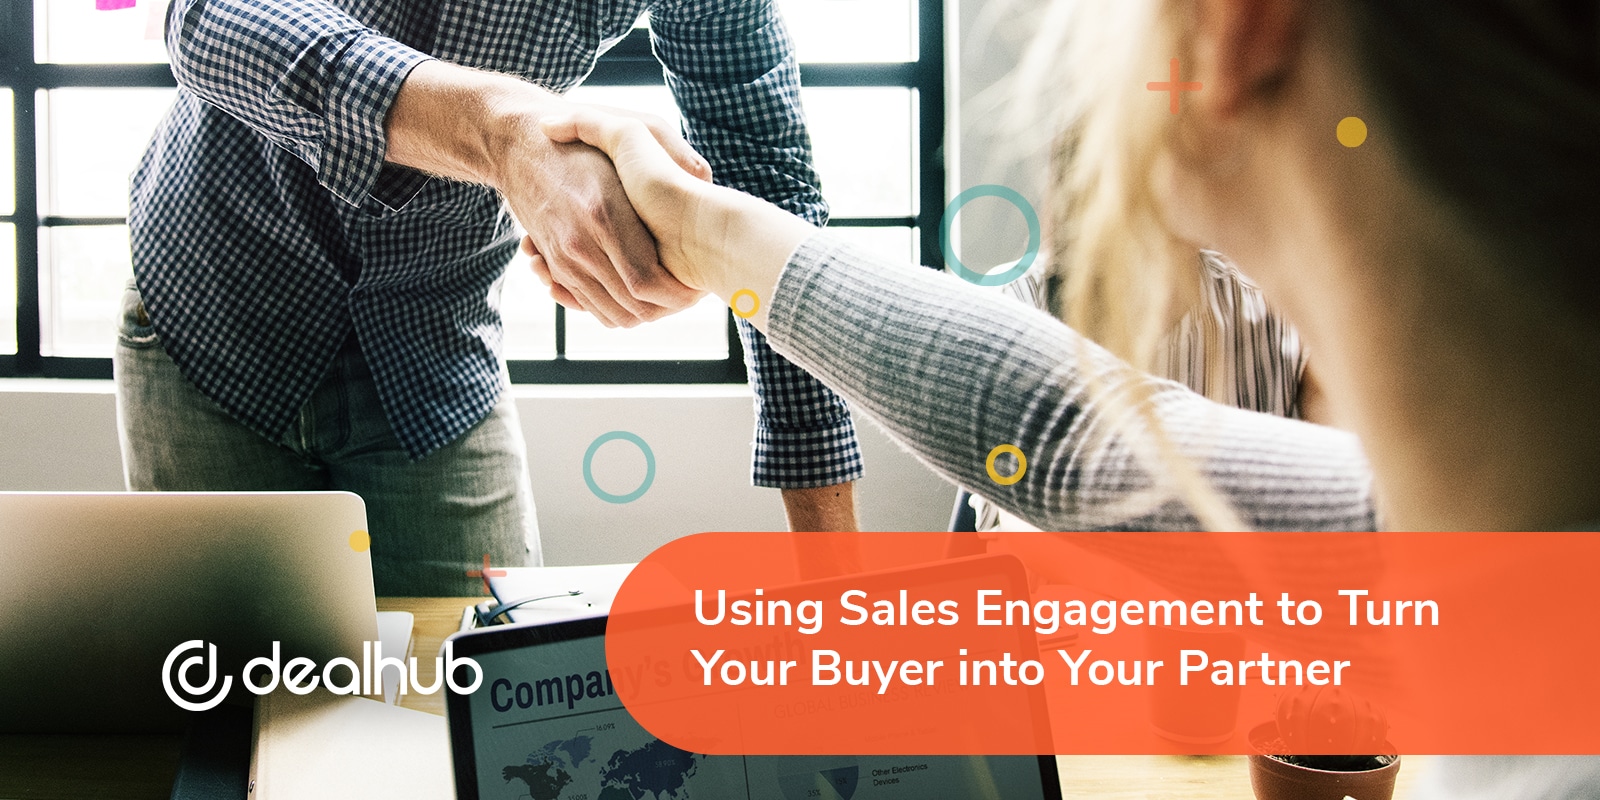 Using Sales Engagement to Turn Your Buyer into Your Partner